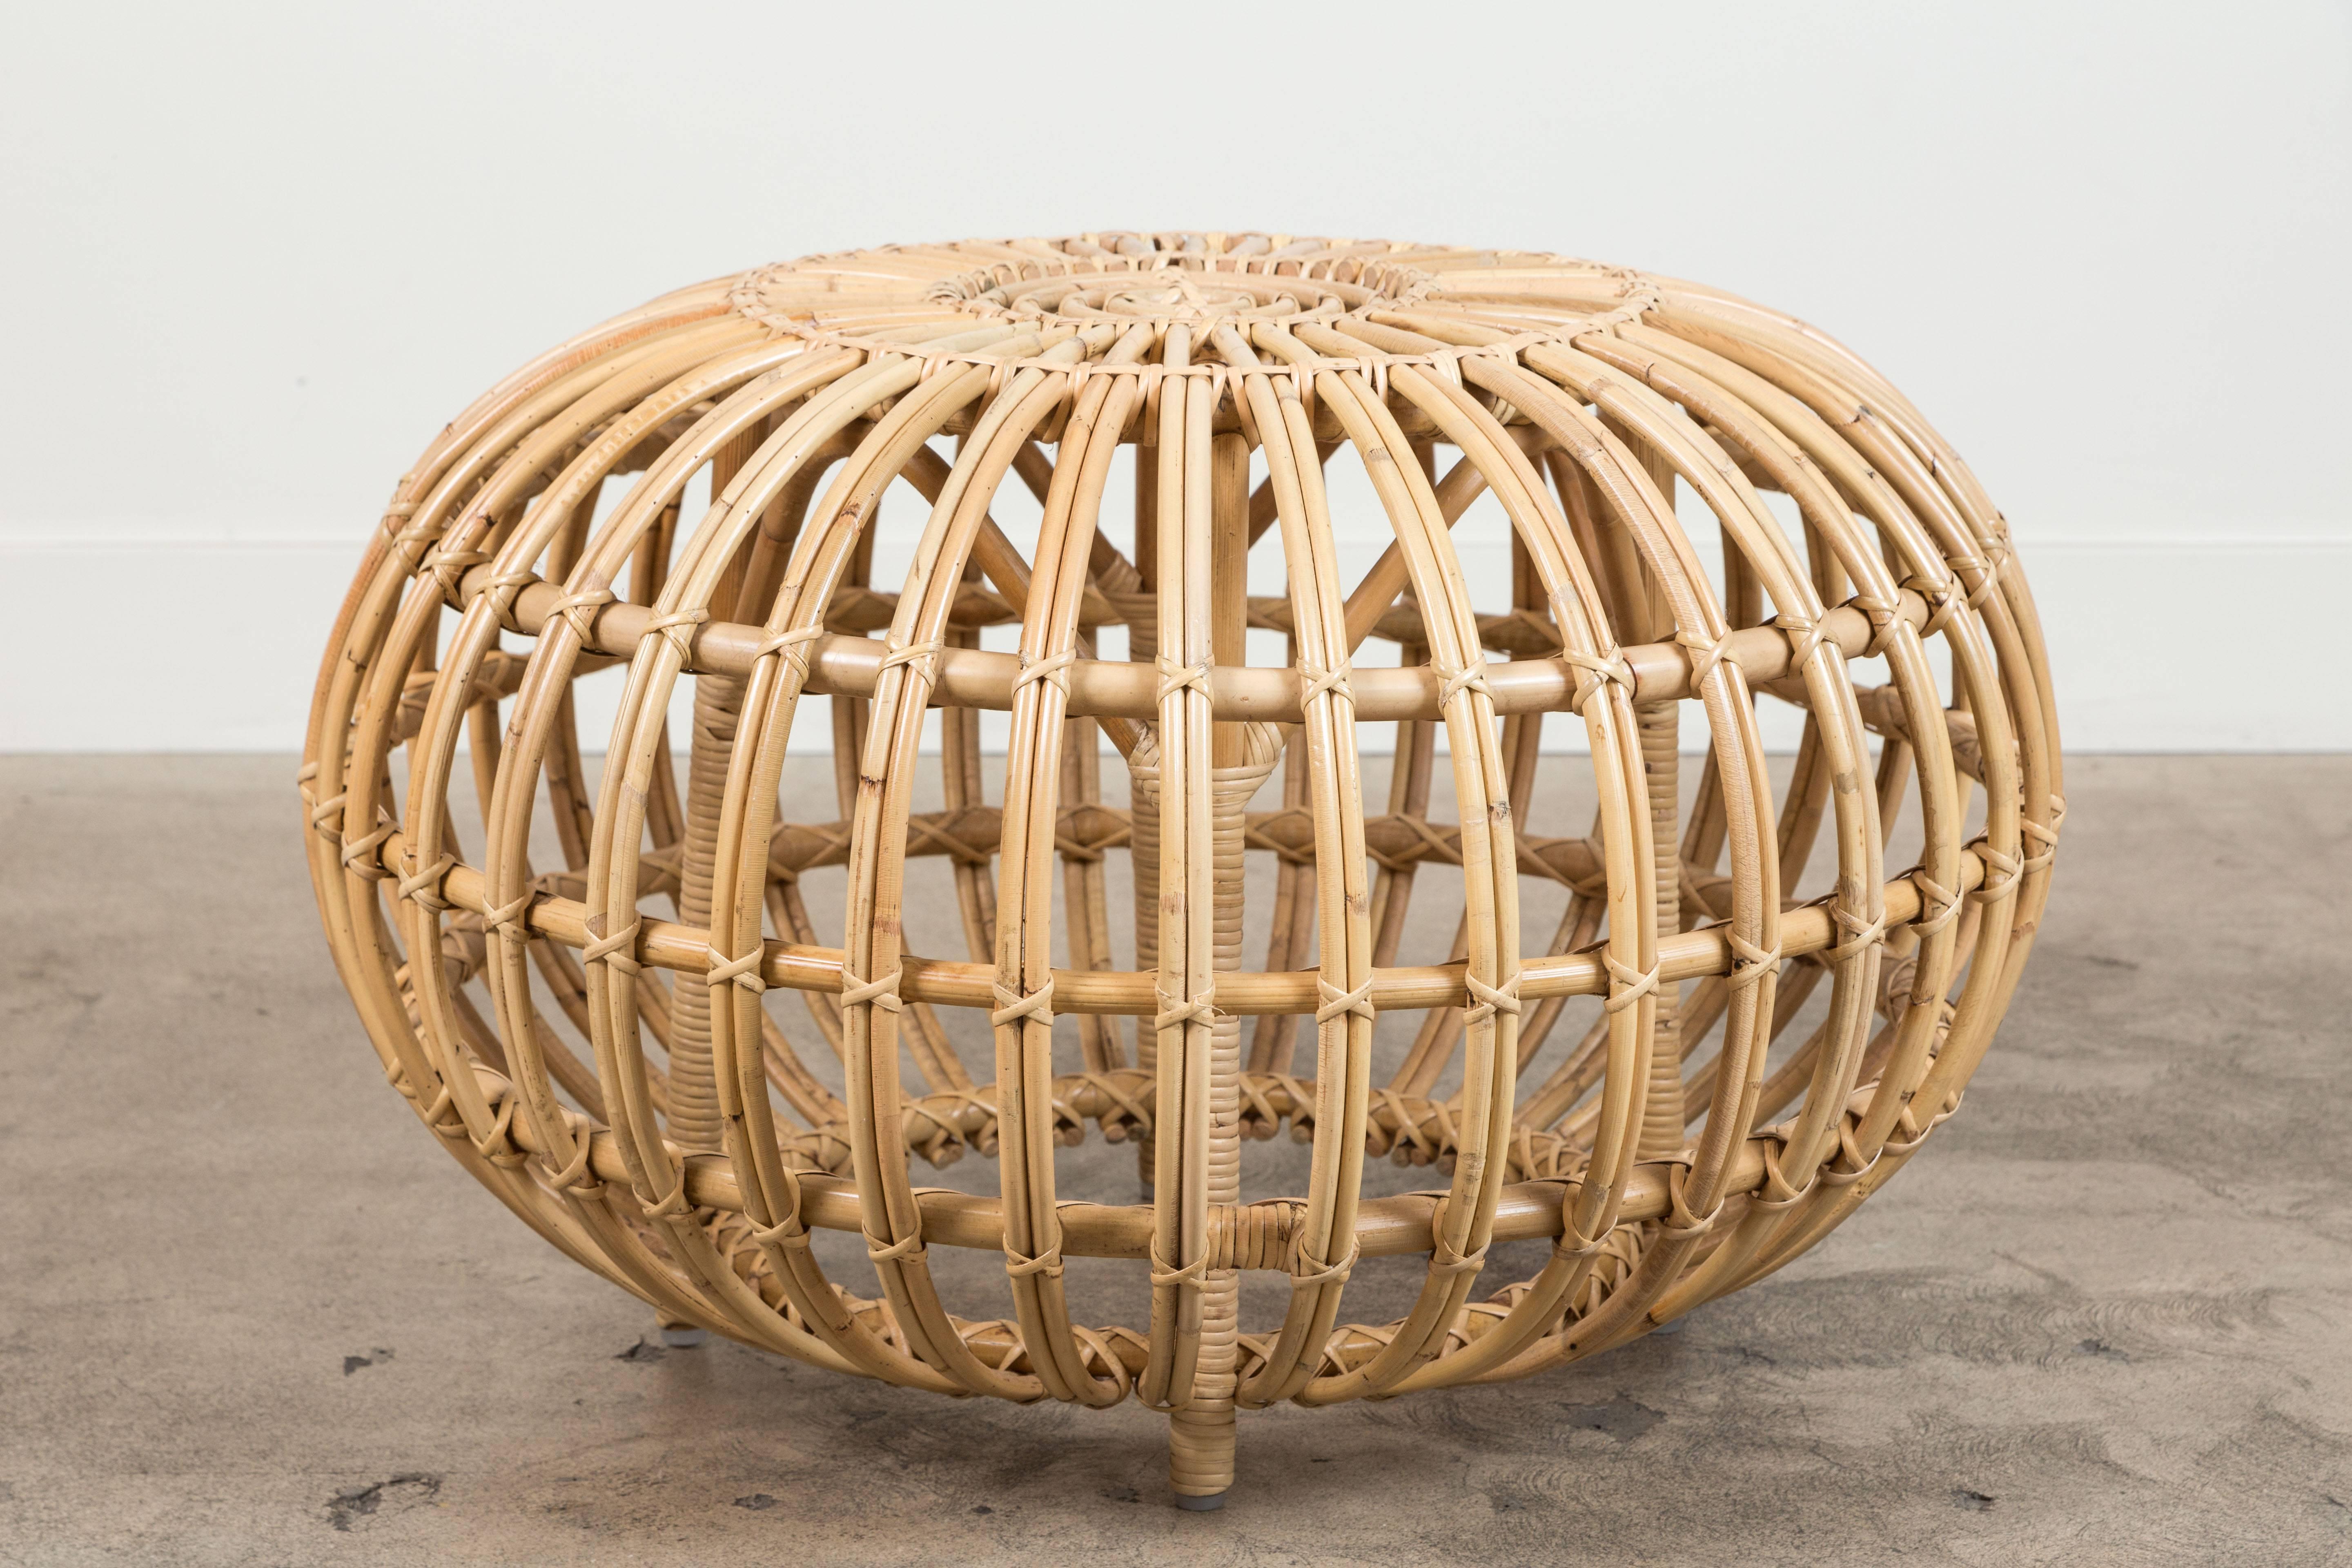 Small rattan ottoman by Franco Albini. Current production by Sika Design.